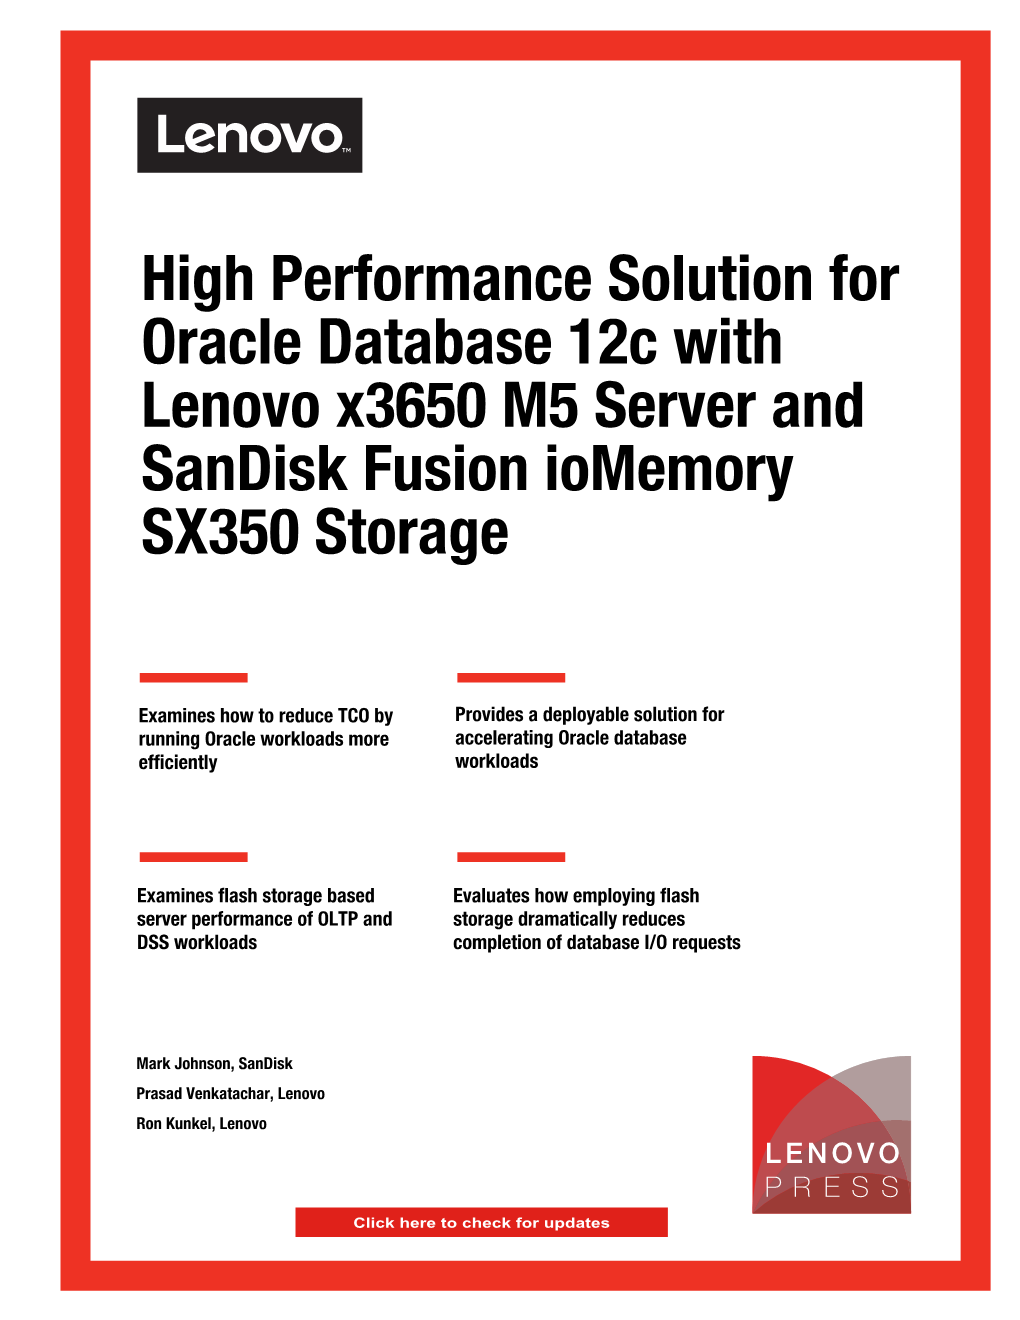 High Performance Solution for Oracle Database 12C with Lenovo X3650 M5 Server and Sandisk Fusion Iomemory SX350 Storage